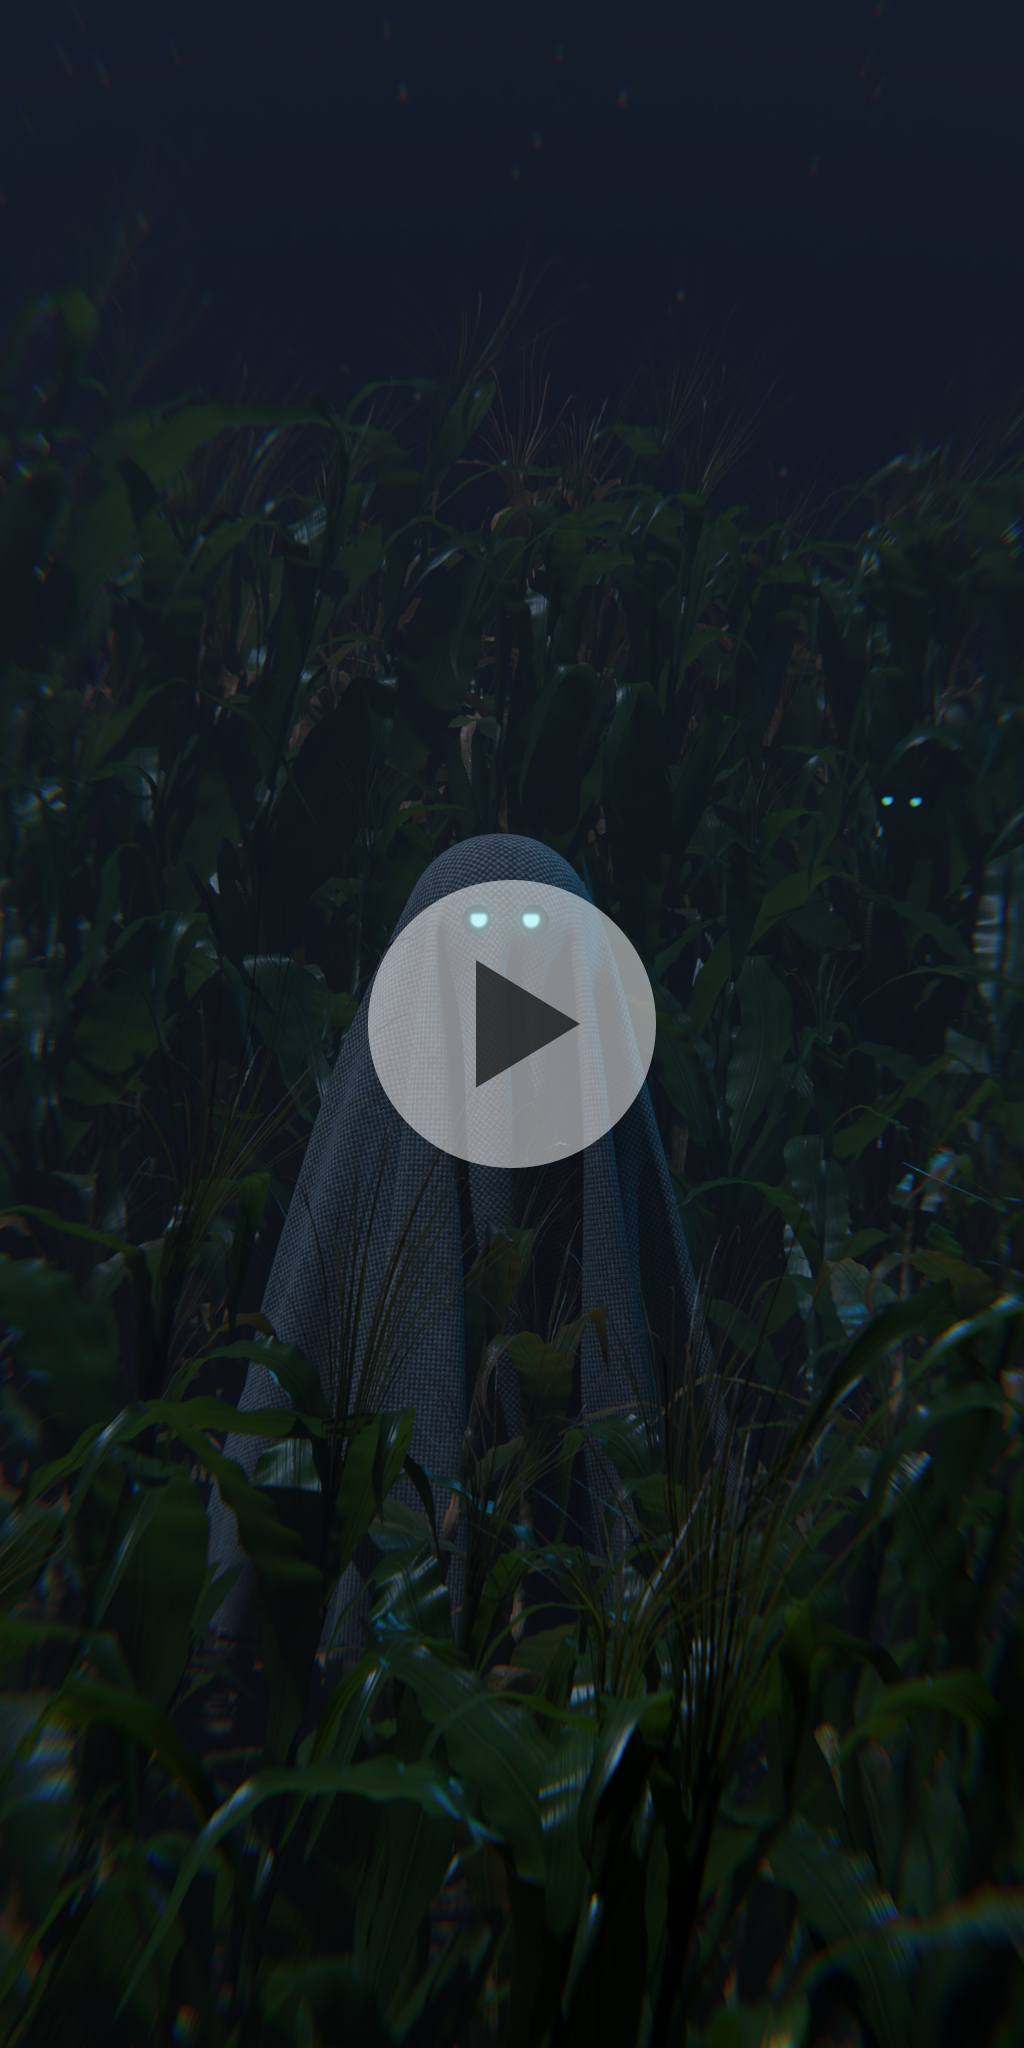 Ghost in cornfield. Live wallpaper for Samsung phones